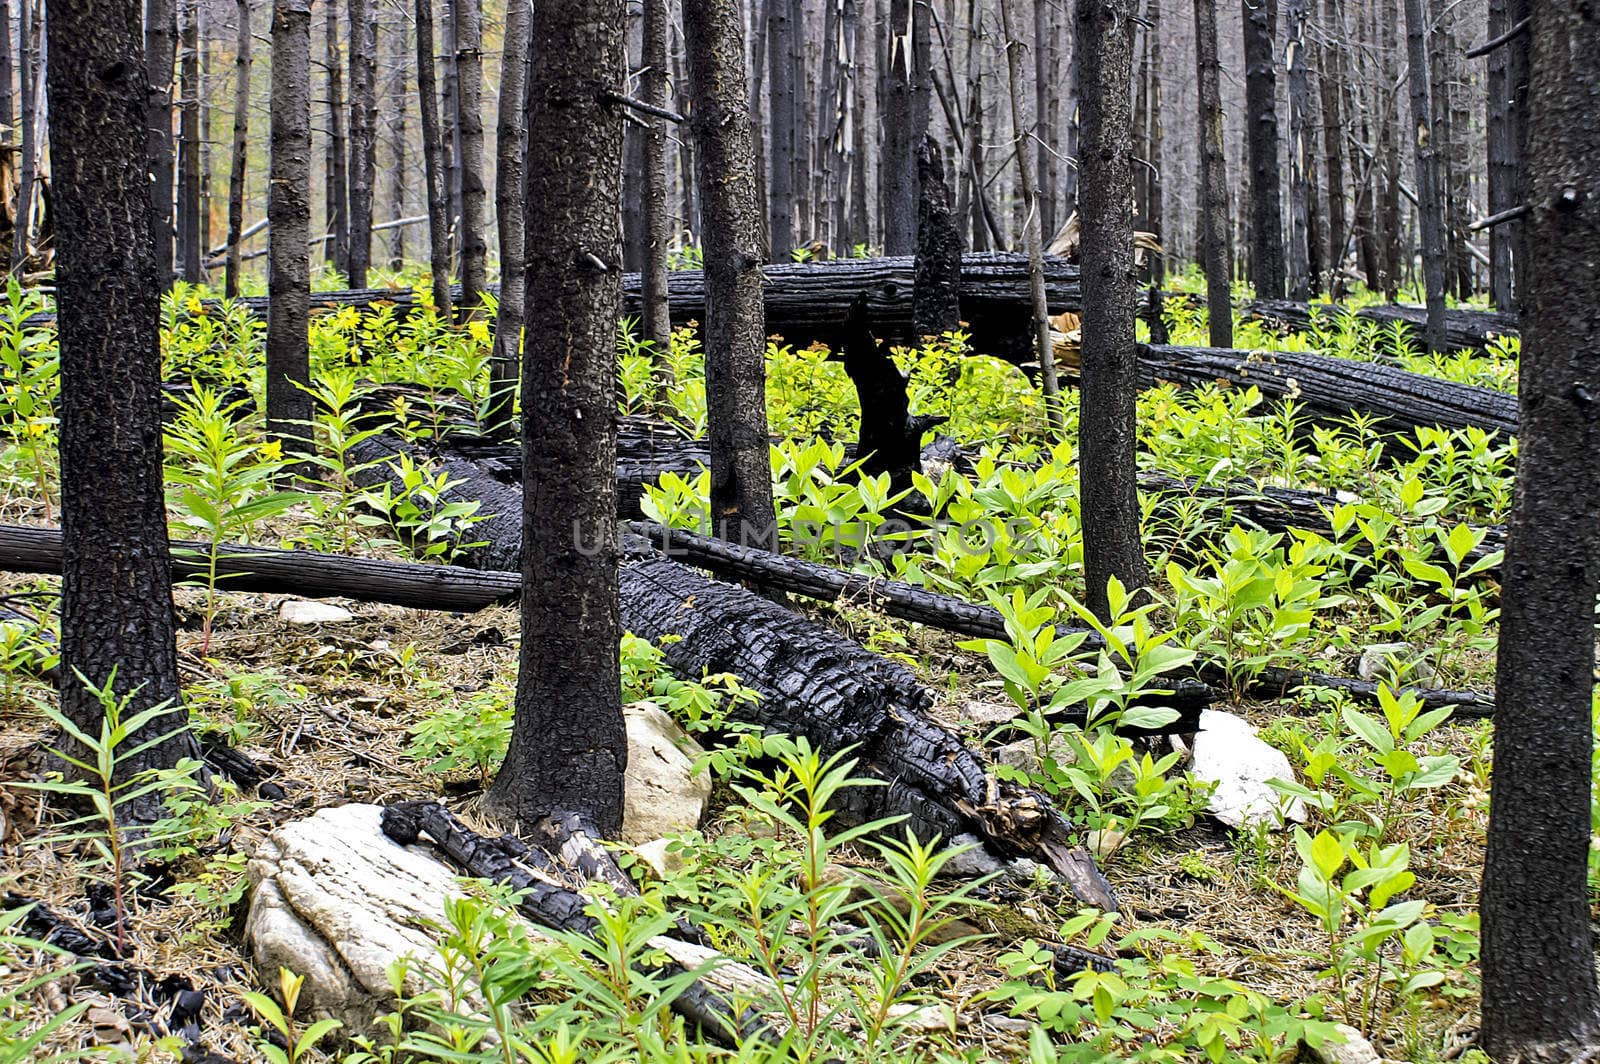 A fire burnt forrest starts to show signs of new life and growth as bright green plants sprout up from the burnt landscape